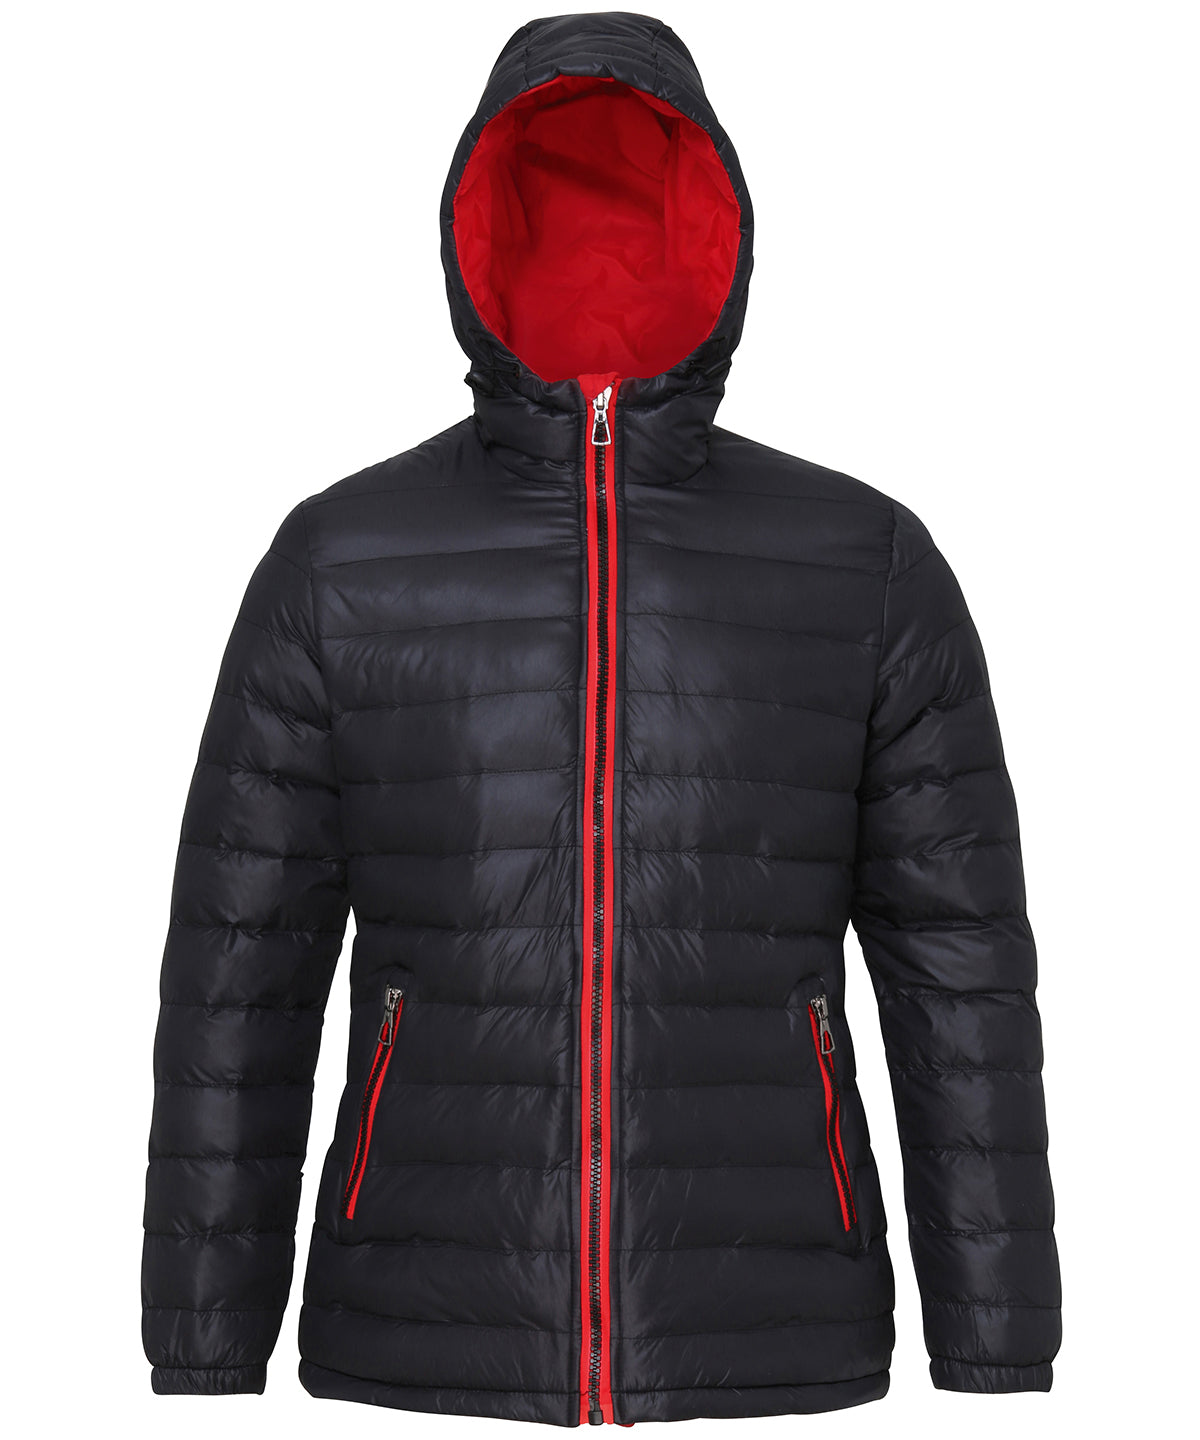 Womens padded jacket | Black/Red